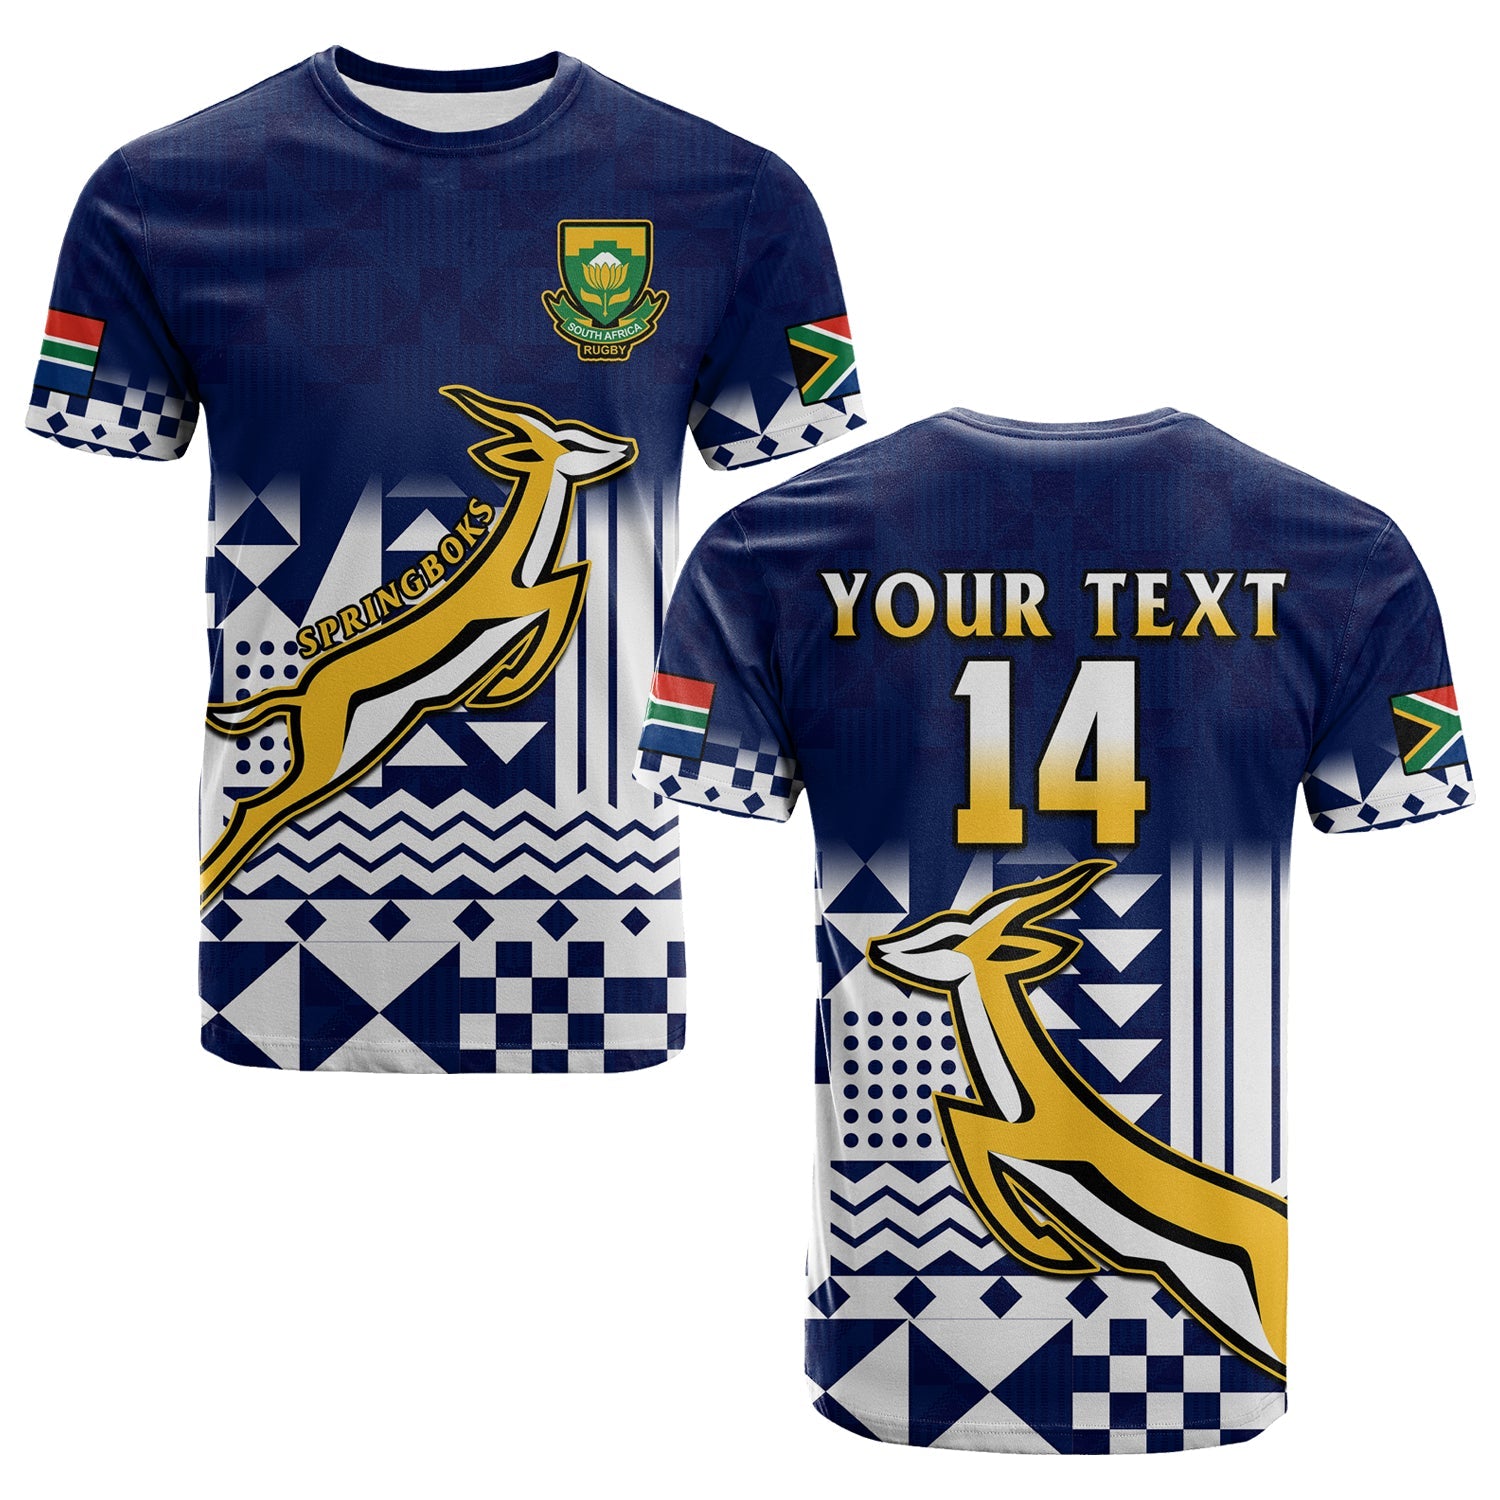 custom-text-and-number-south-africa-rugby-t-shirt-outgoing-tour-go-springboks